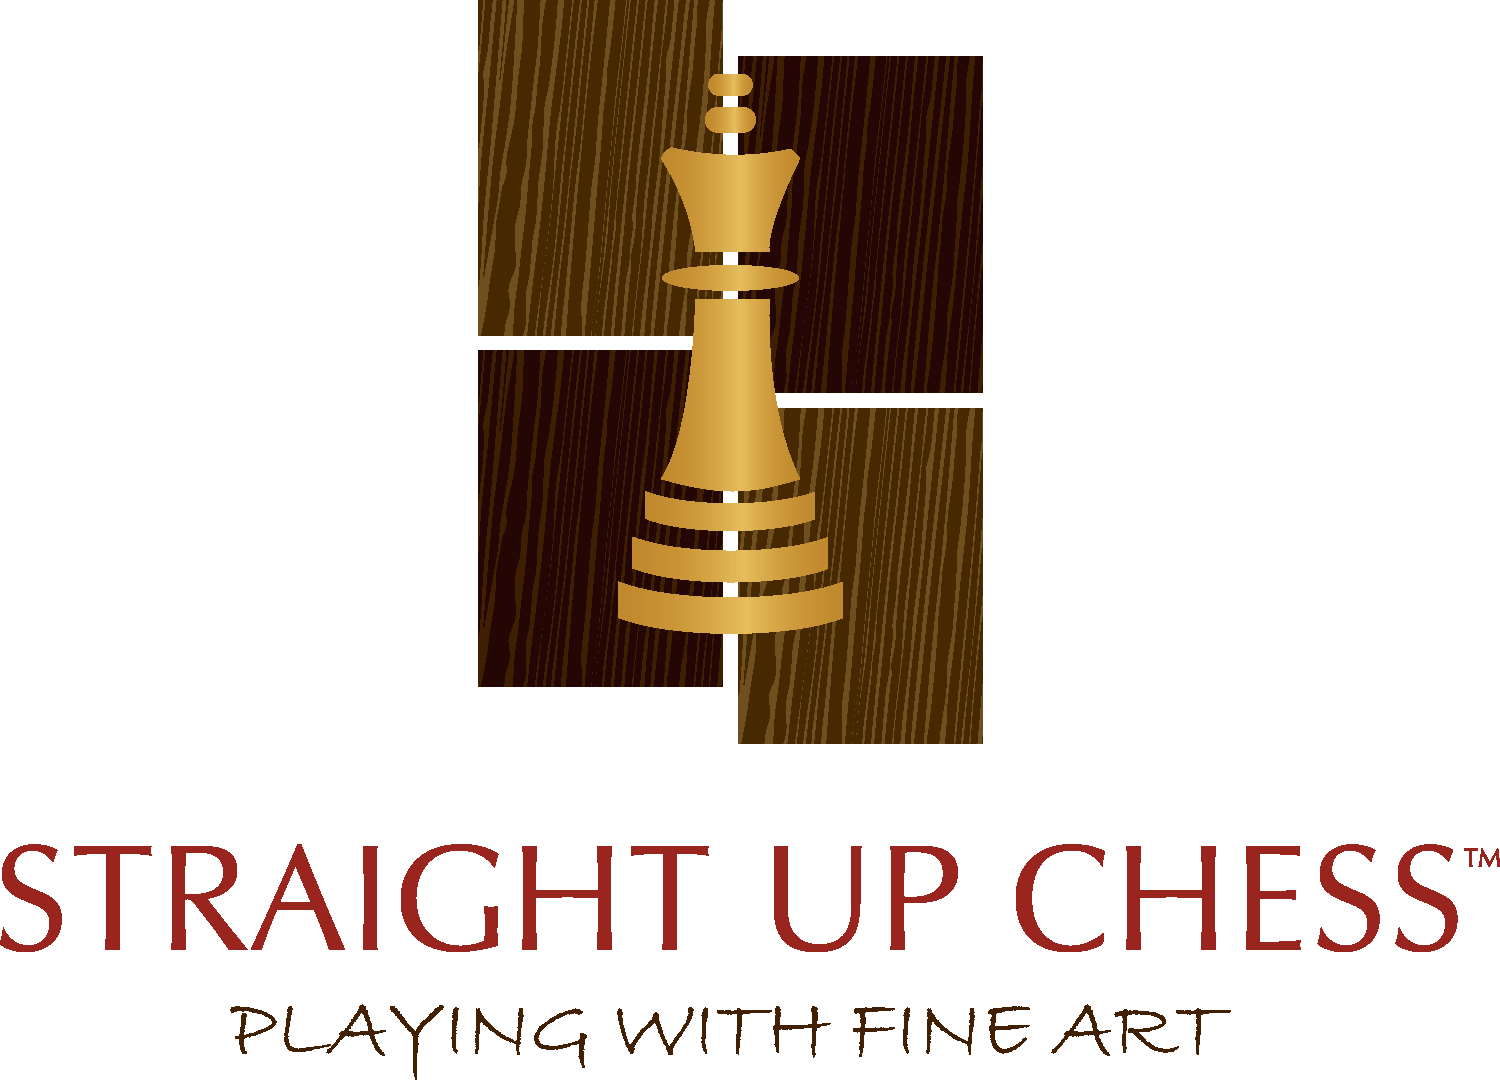 Buy Chess Sets - Wooden Chess Boards, Chess Pieces Online from chessbazaar